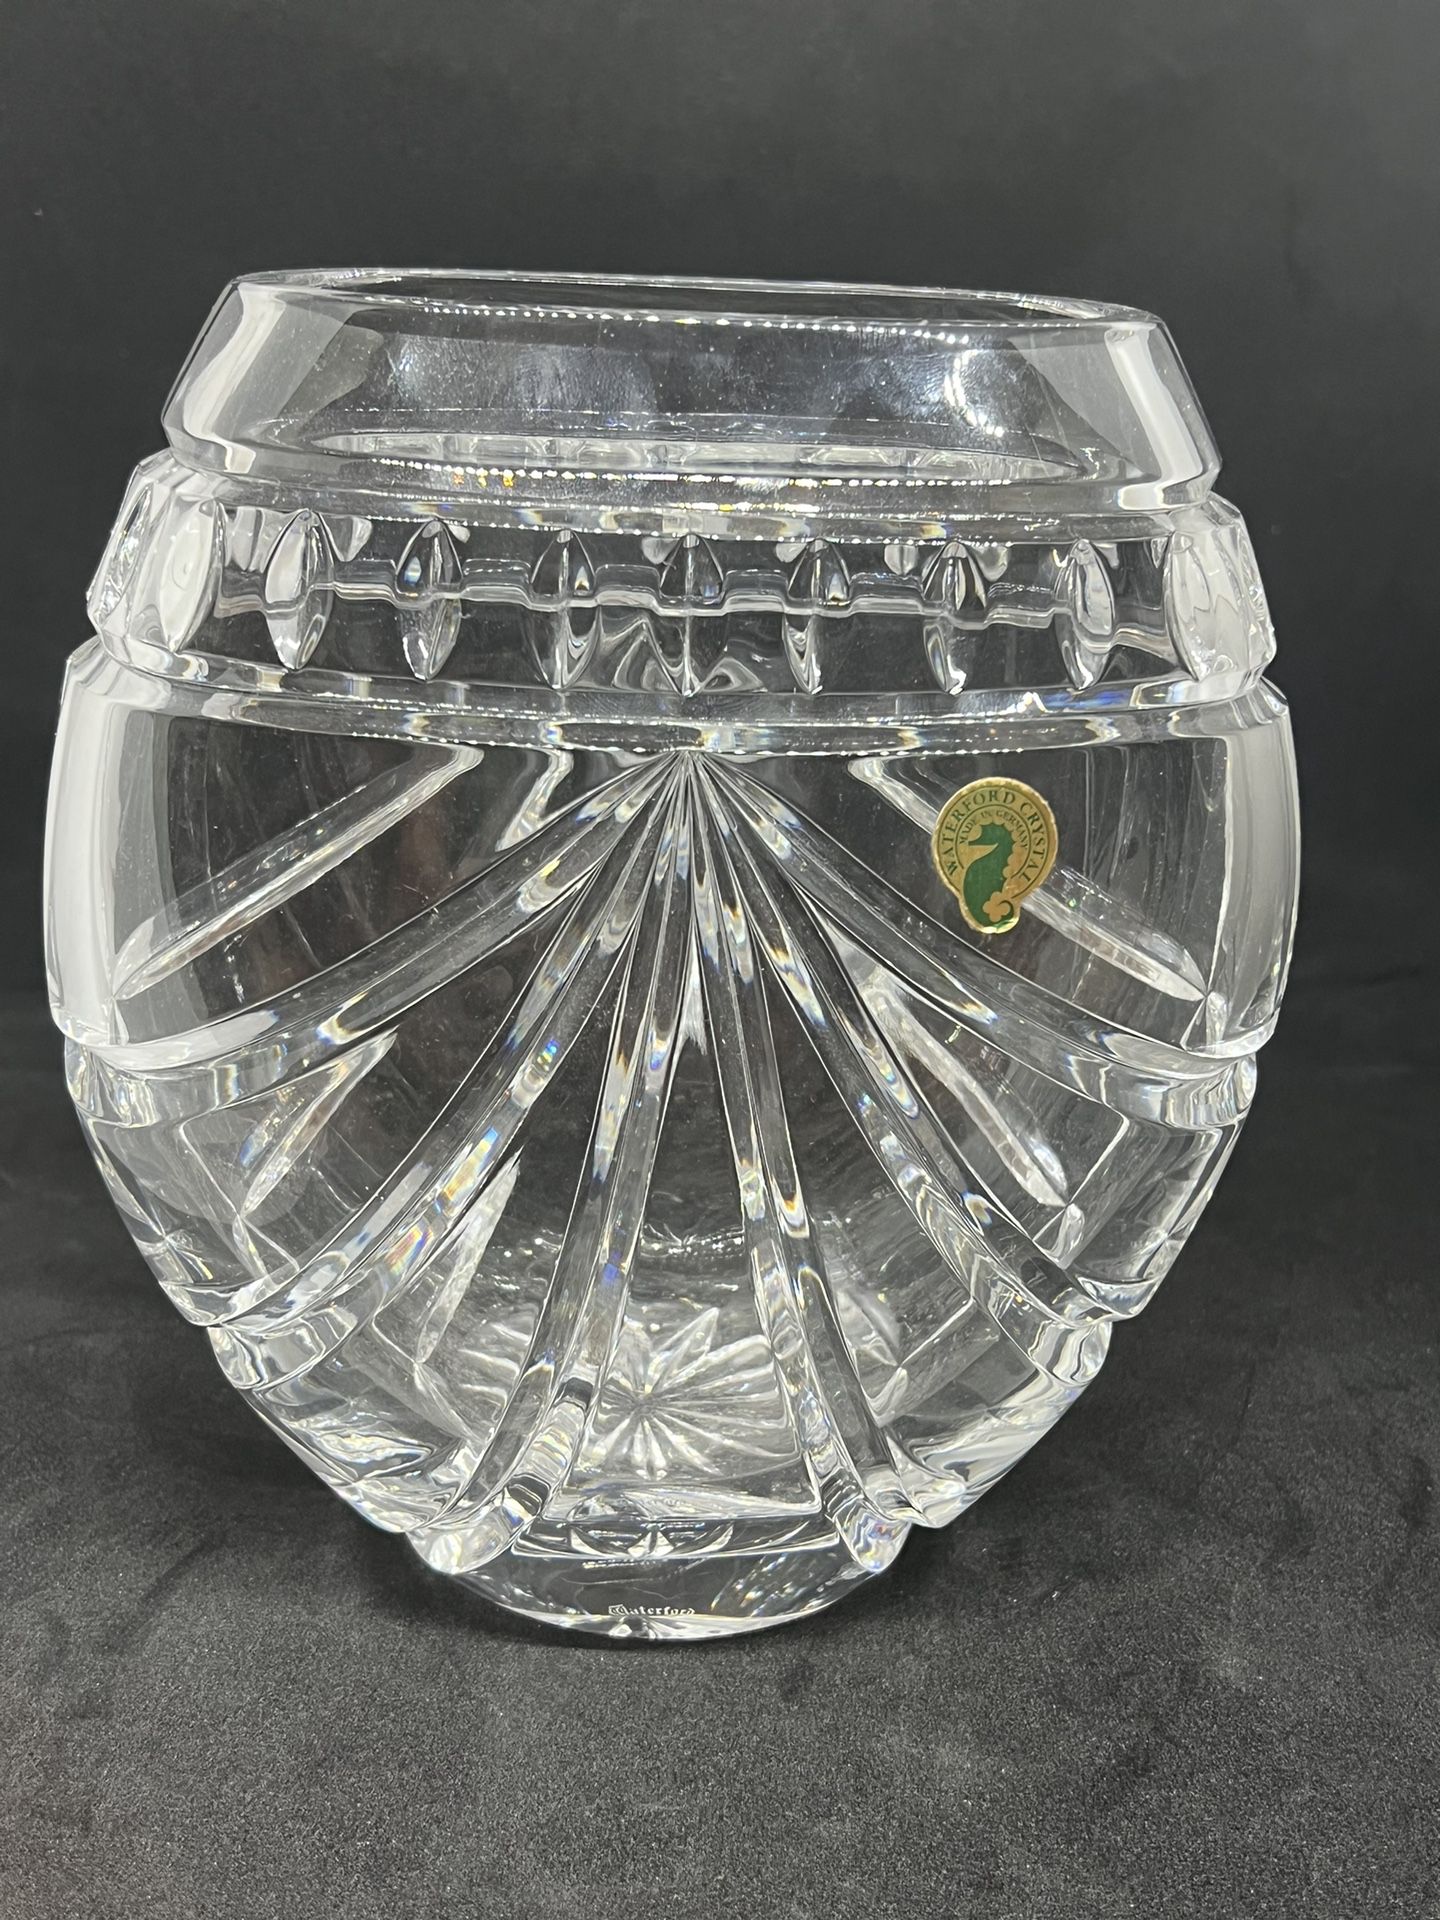 Waterford Brilliant Crystal OVERTURE ROSE VASE 1(contact info removed) Oval Vase 8” IRELAND